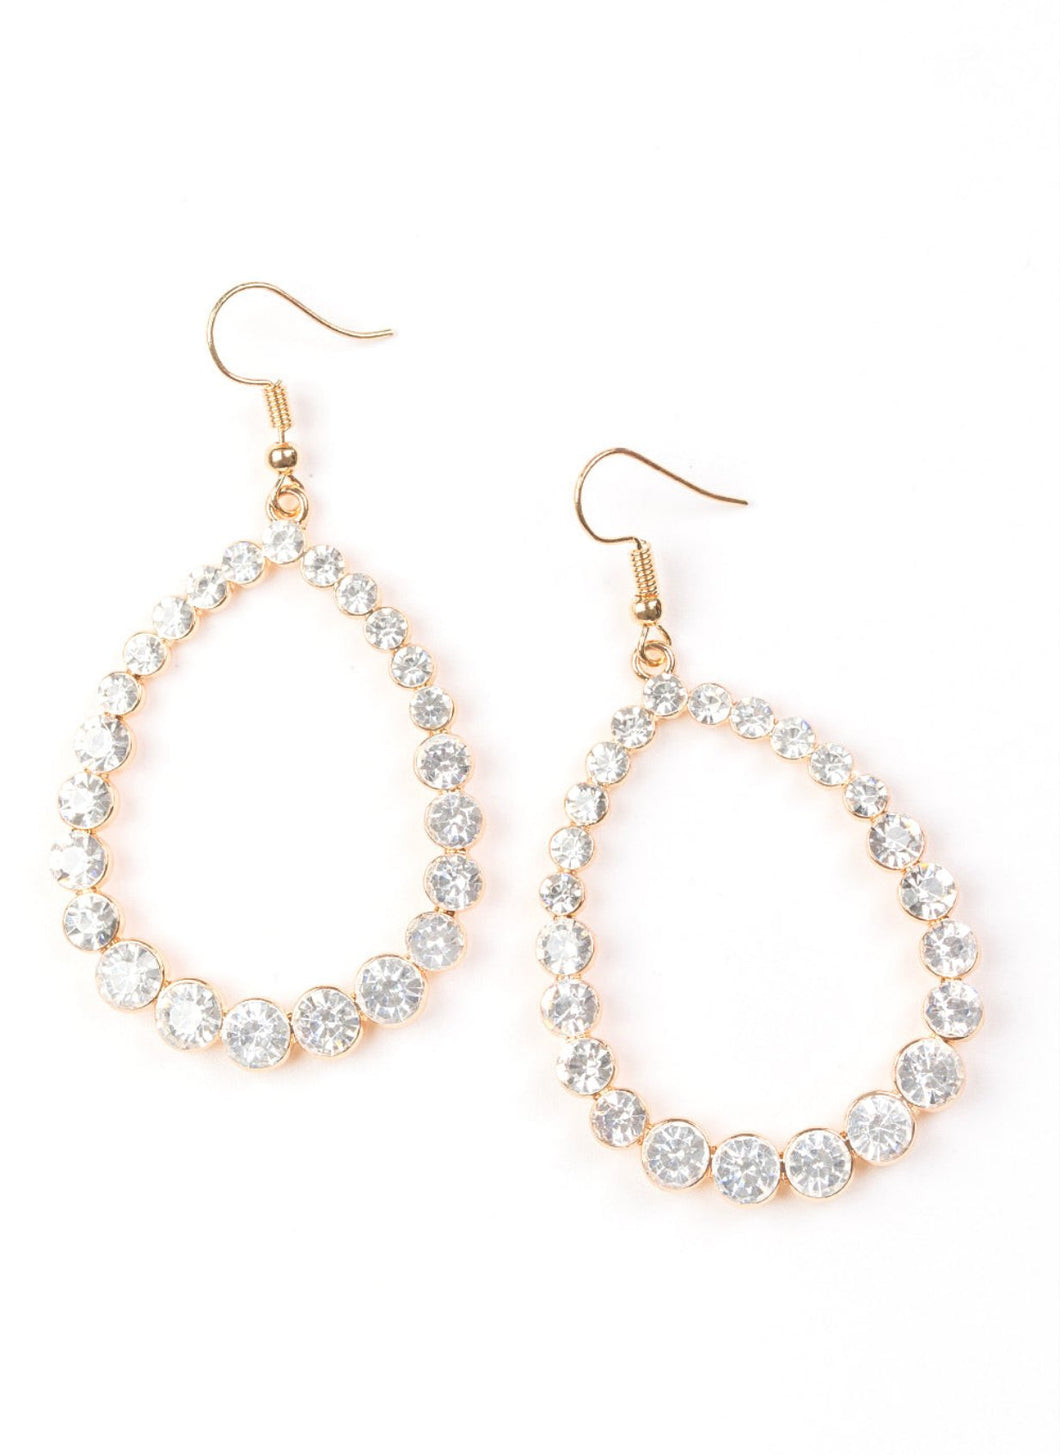 Rise and Sparkle! Gold and Bling Earrings